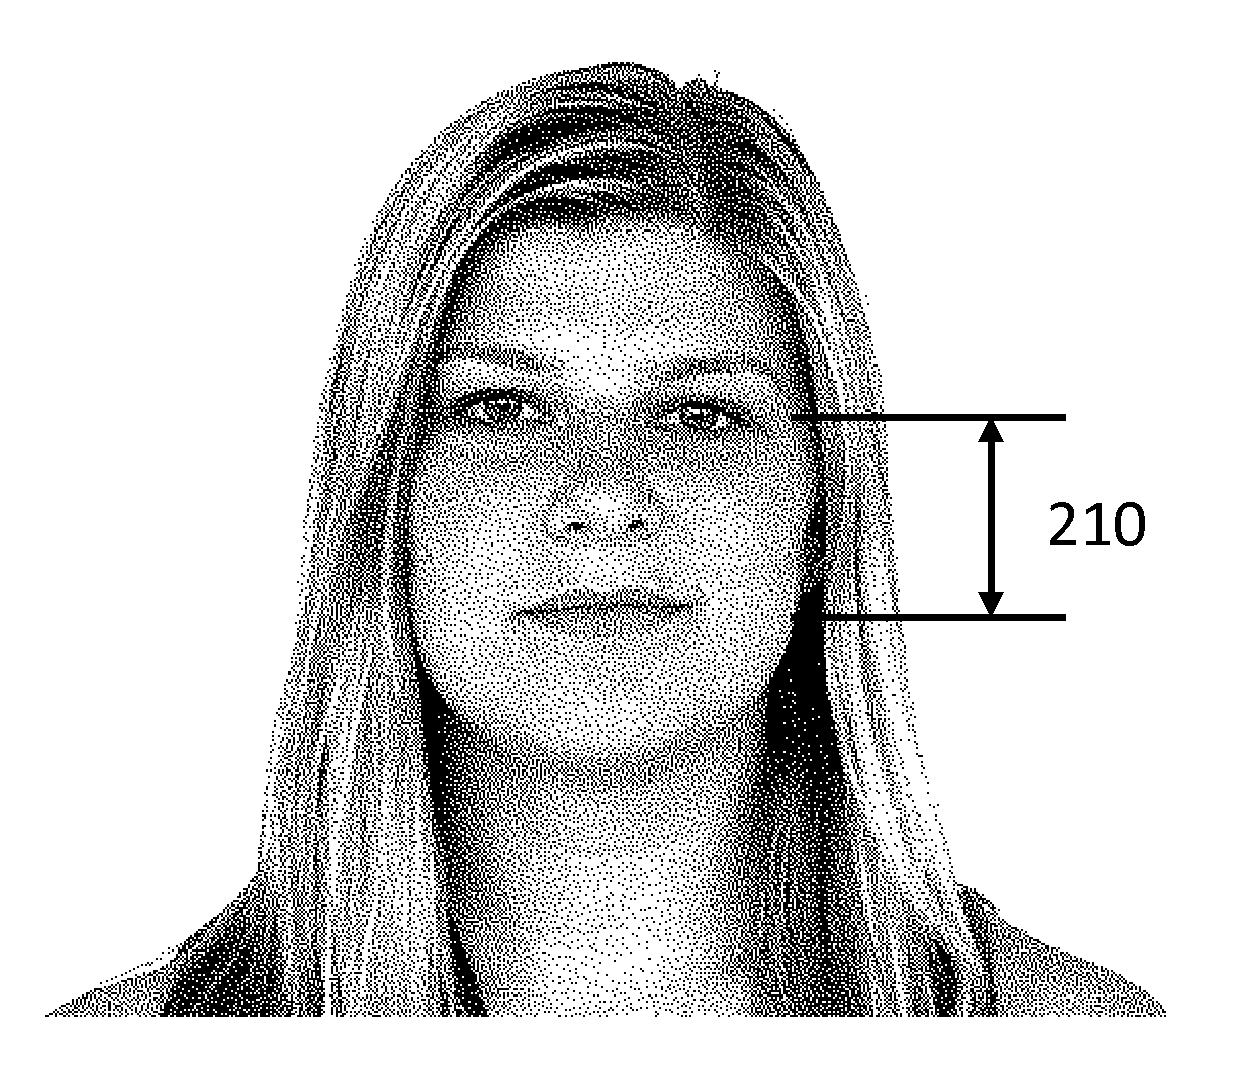 System for producing compliant facial images for selected identification documents